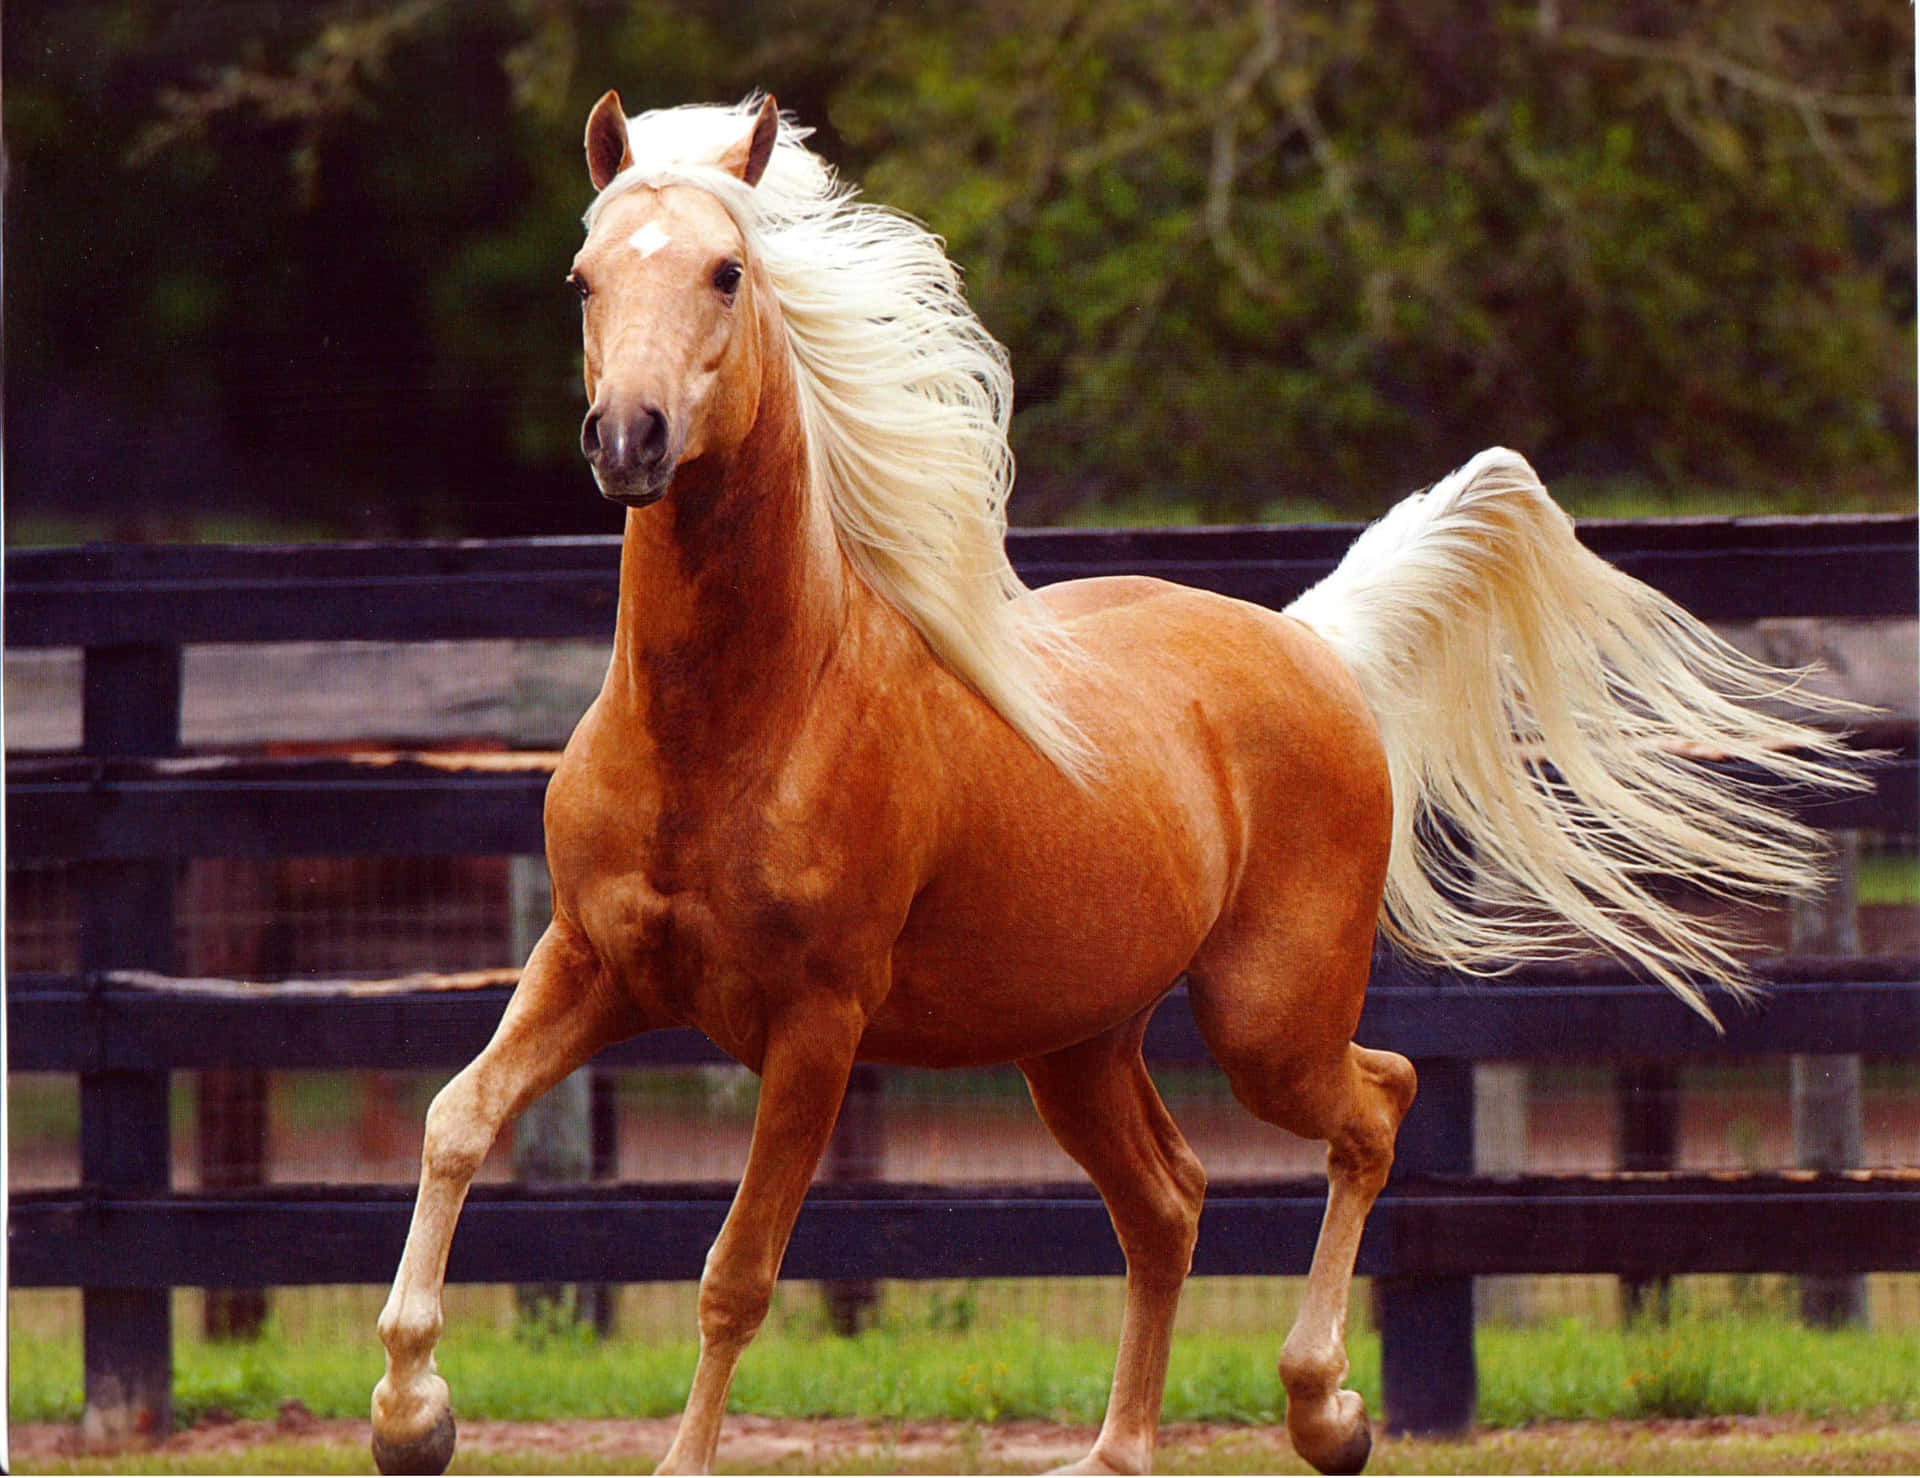 "A Palomino Horse in the Wild with a Golden Mane and Tail"